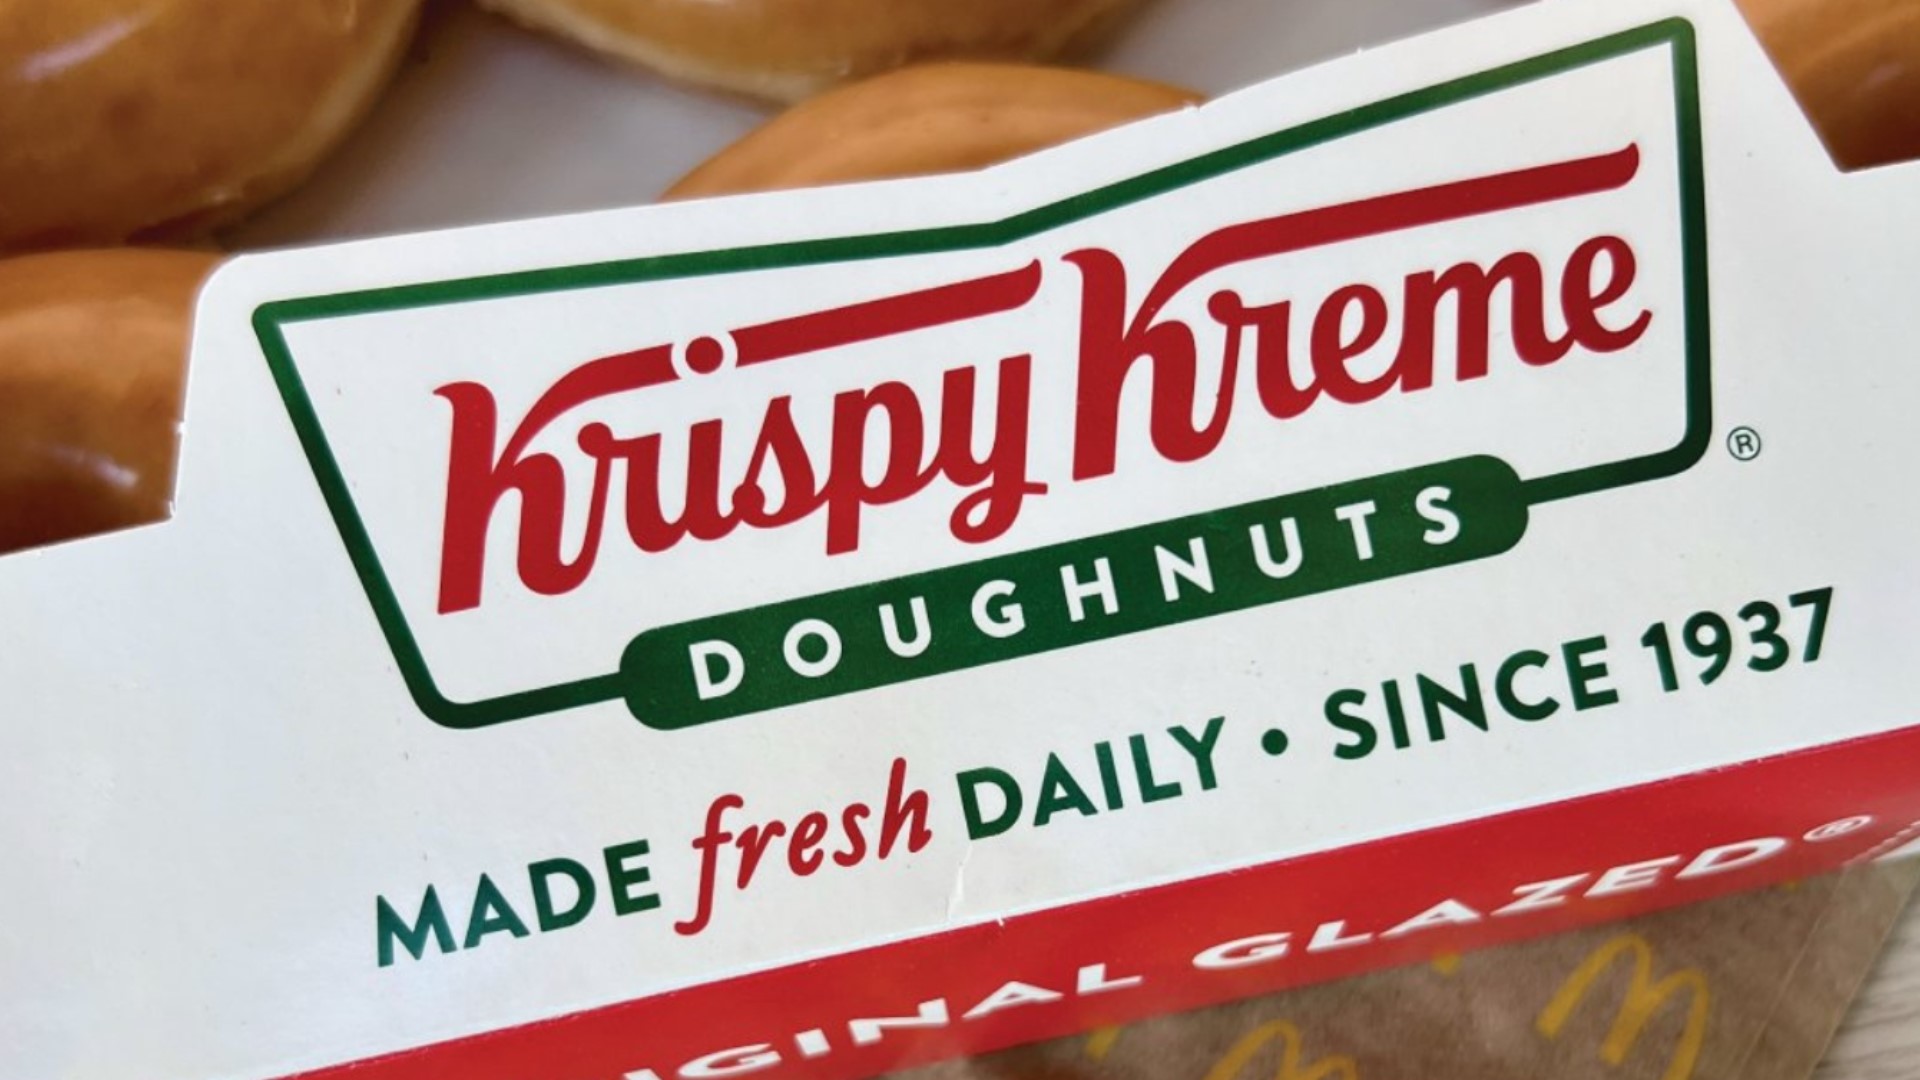 Krispy Kreme will deliver the donuts fresh each day to McDonalds locations.